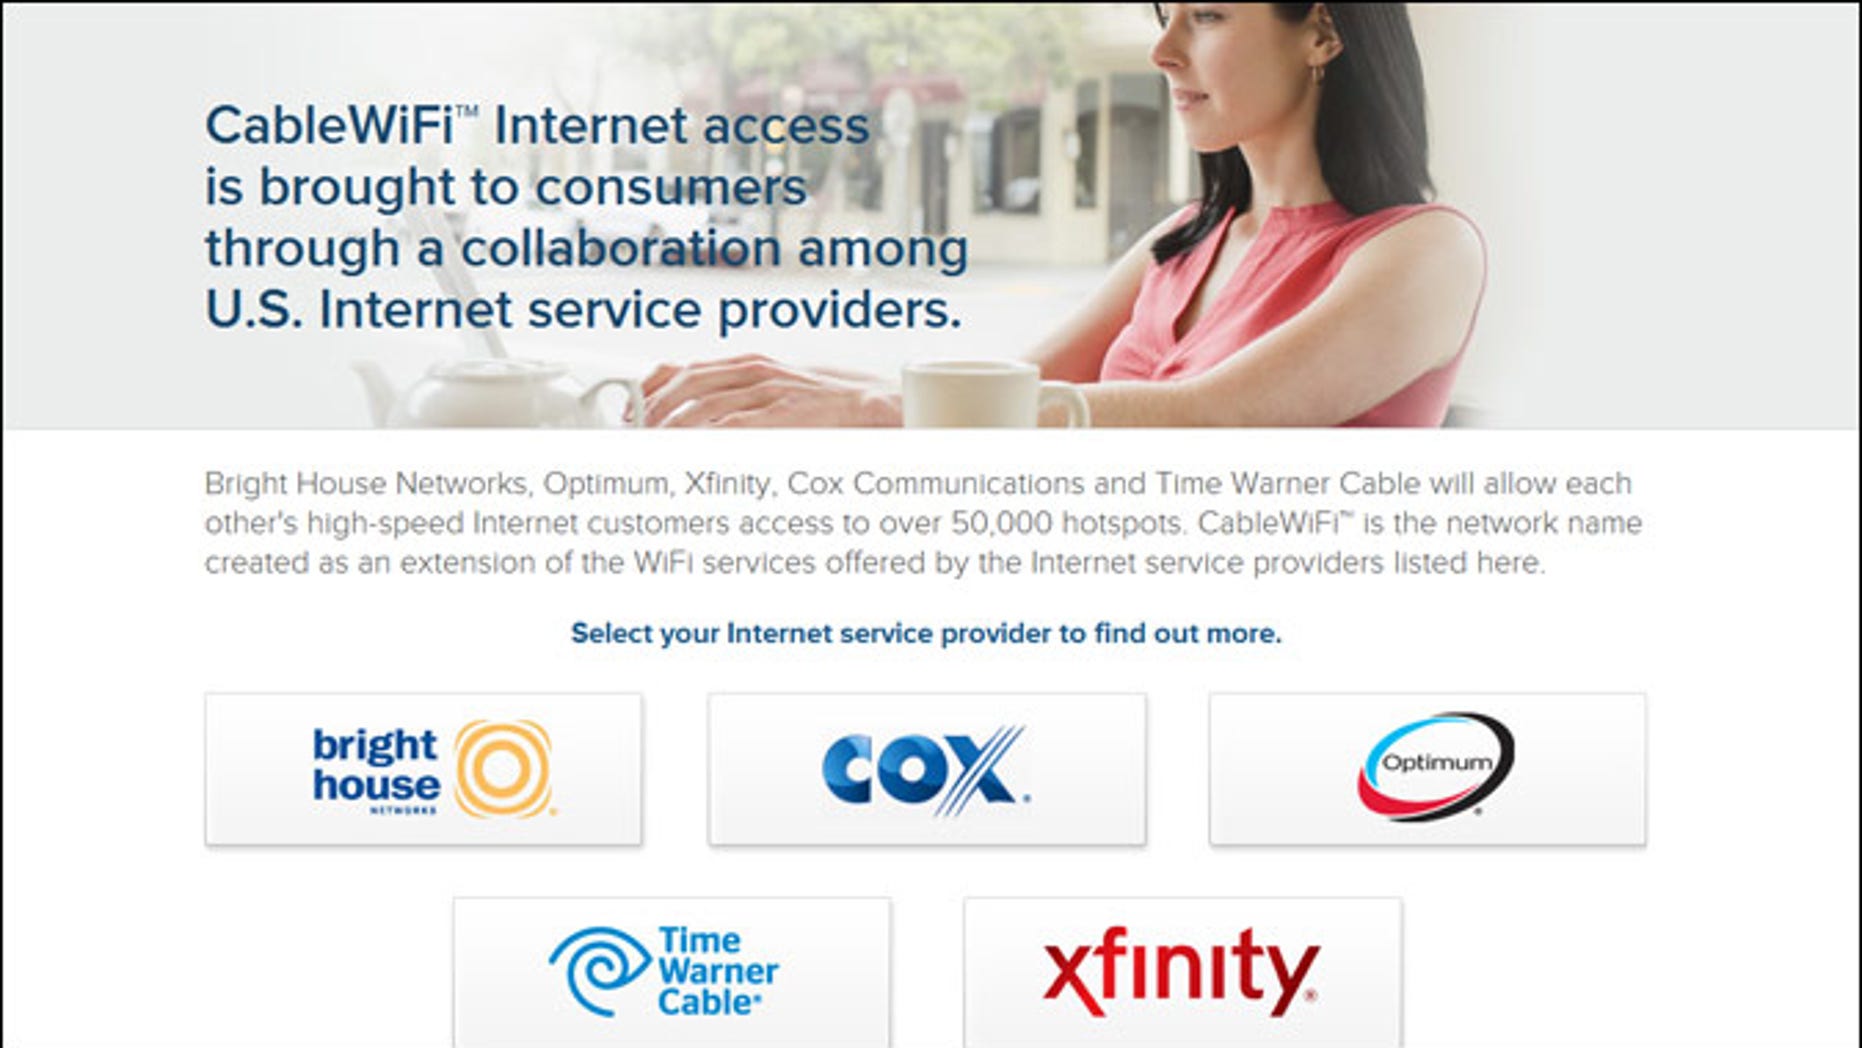 Major Internet Providers Cablewifi Team Up Makes Hotspot Access